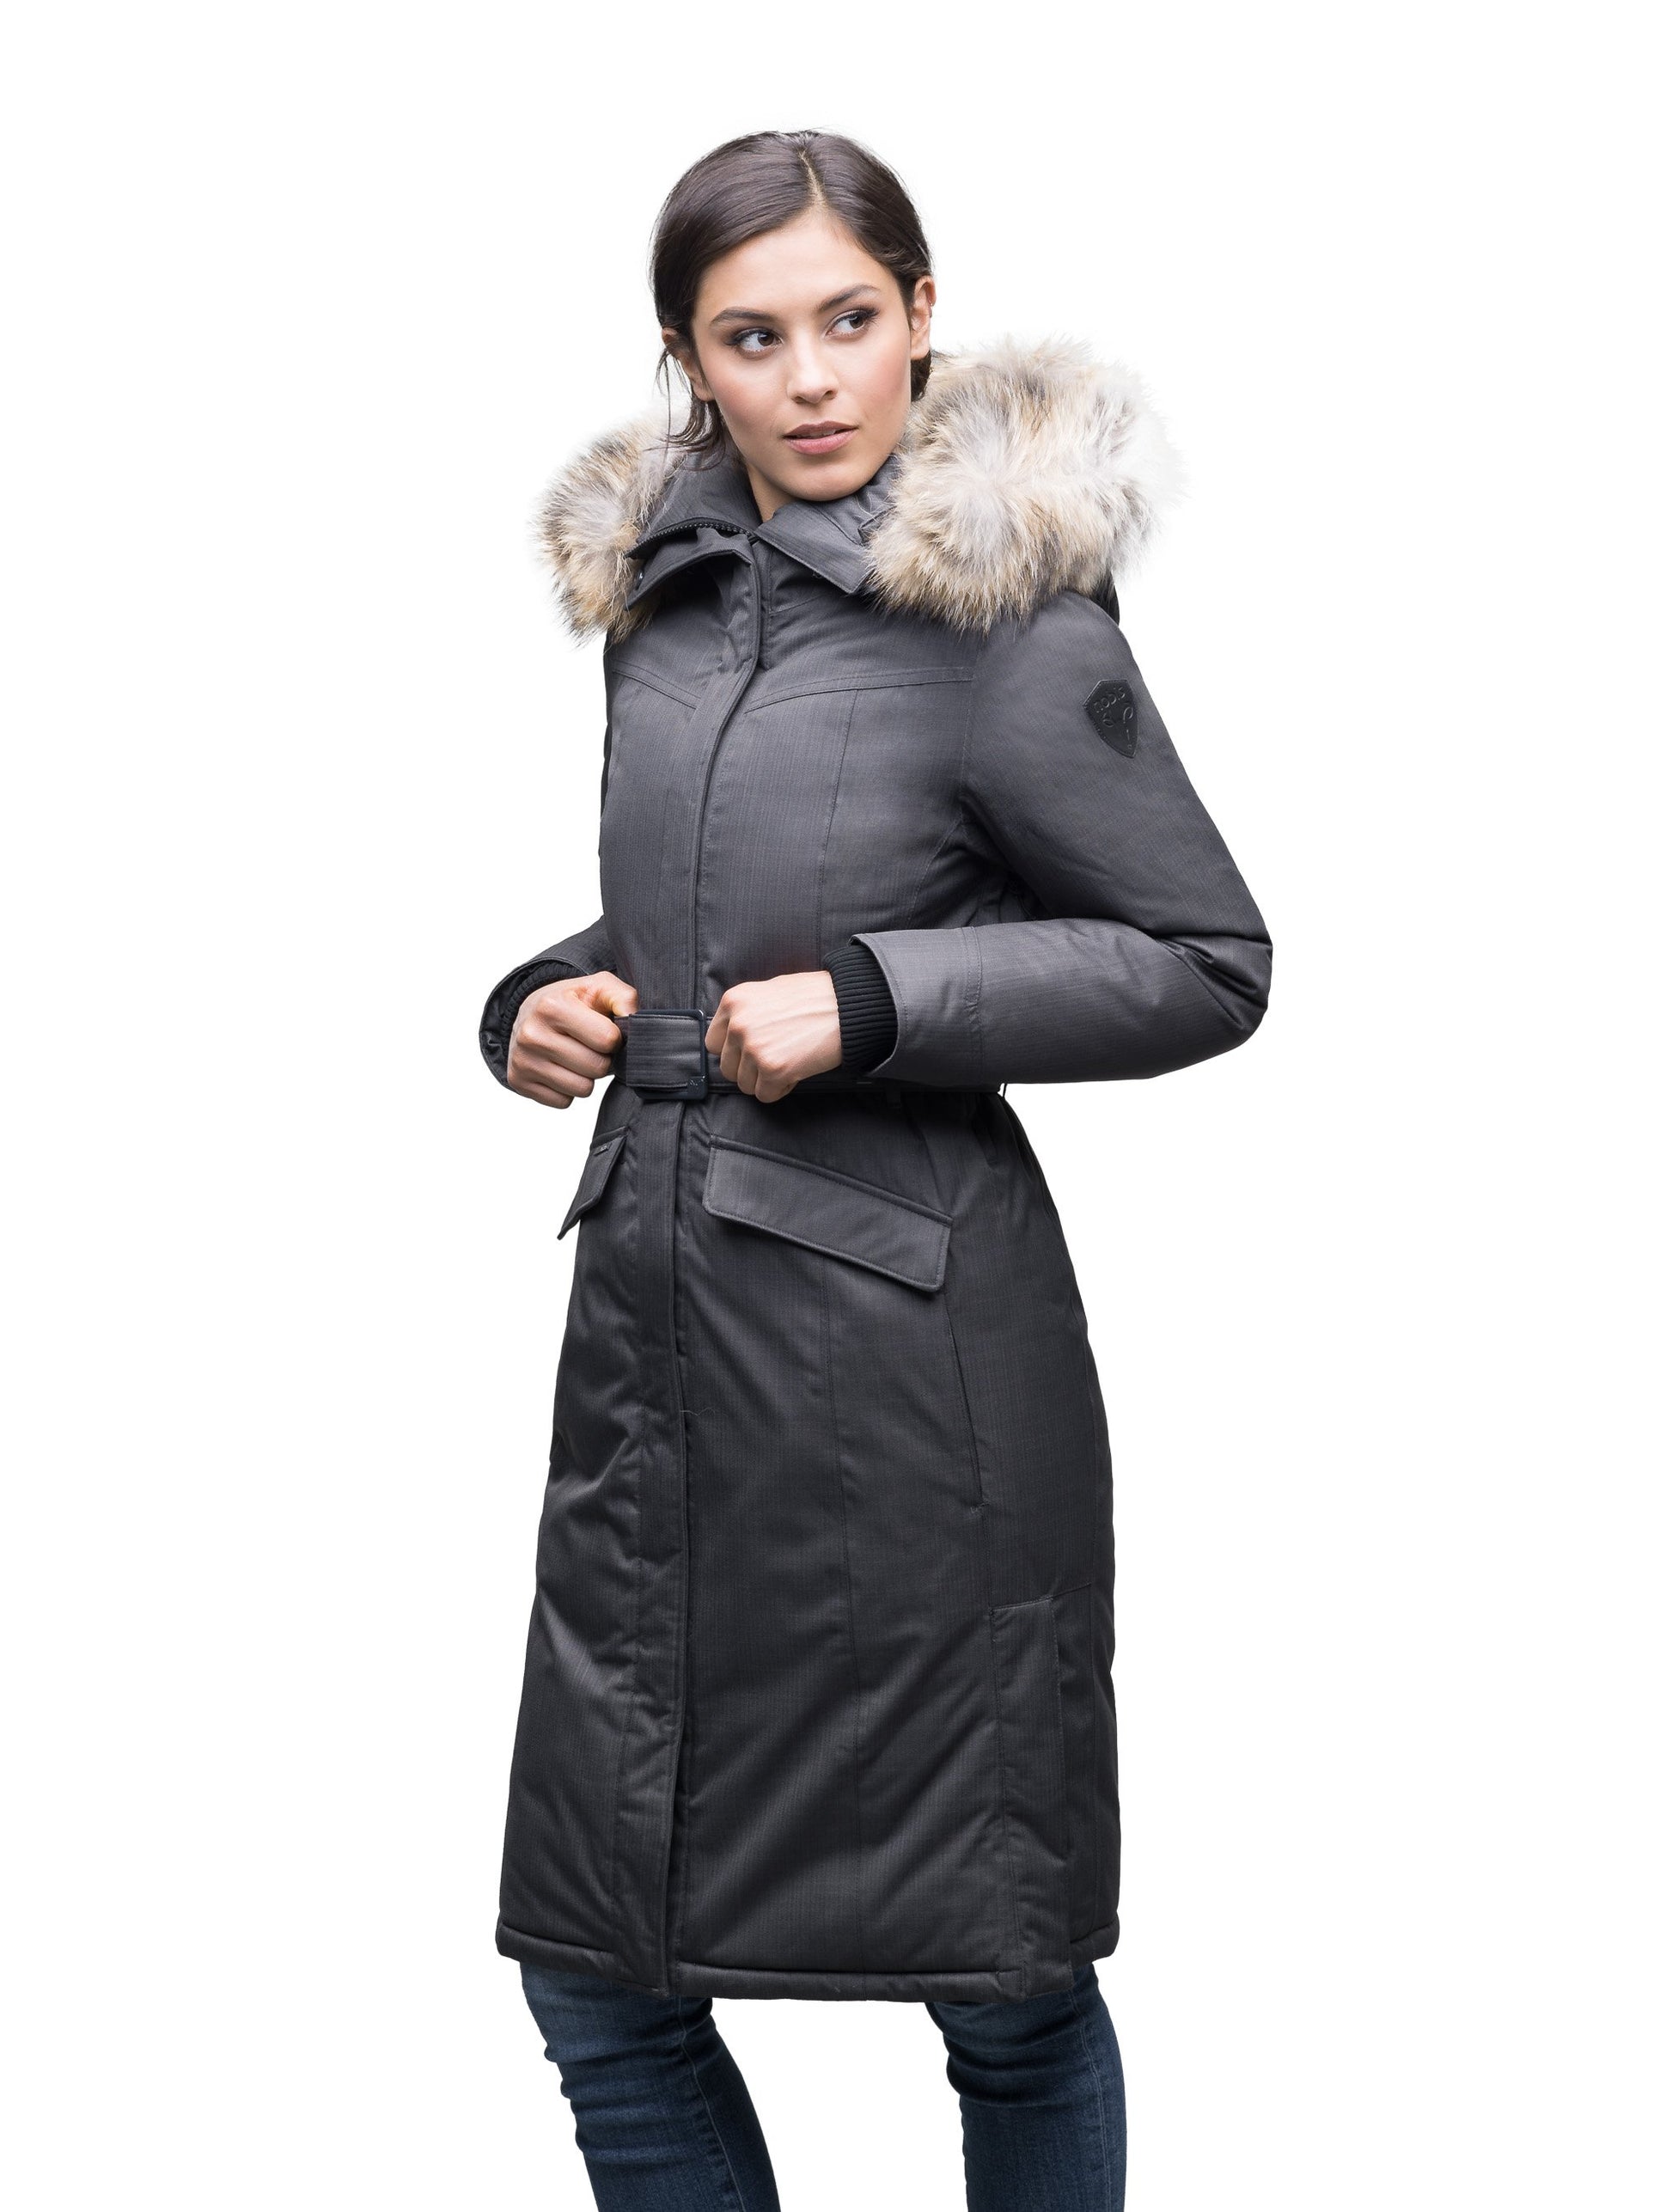 Women's maxi down filled parka with calf length hem in CH Steel Grey